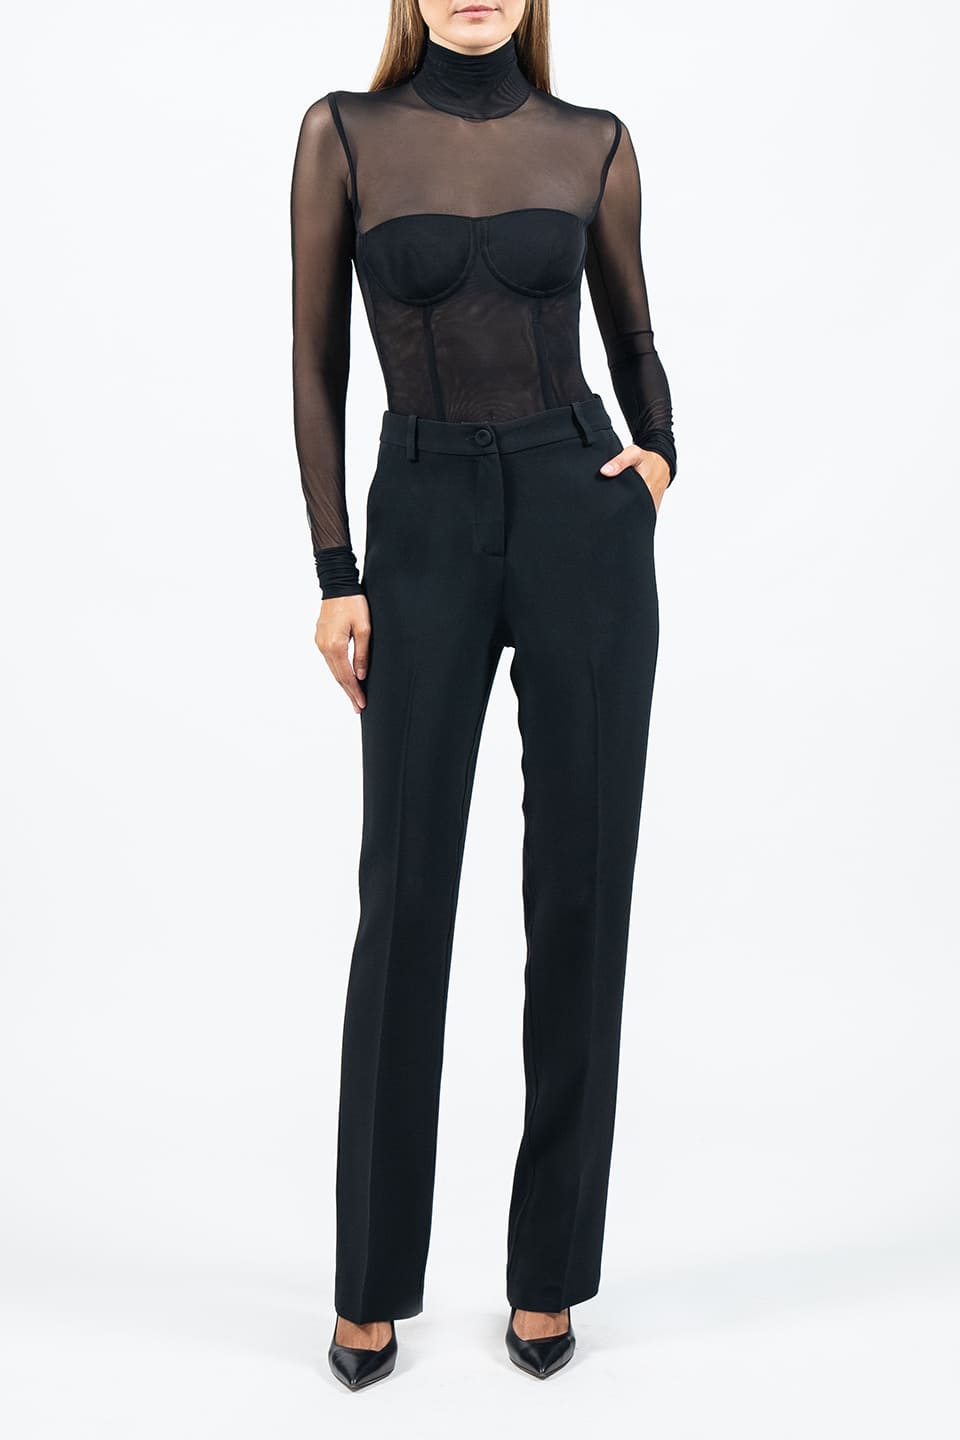 Designer Black Women pants, shop online with free delivery in UAE. Product gallery 5